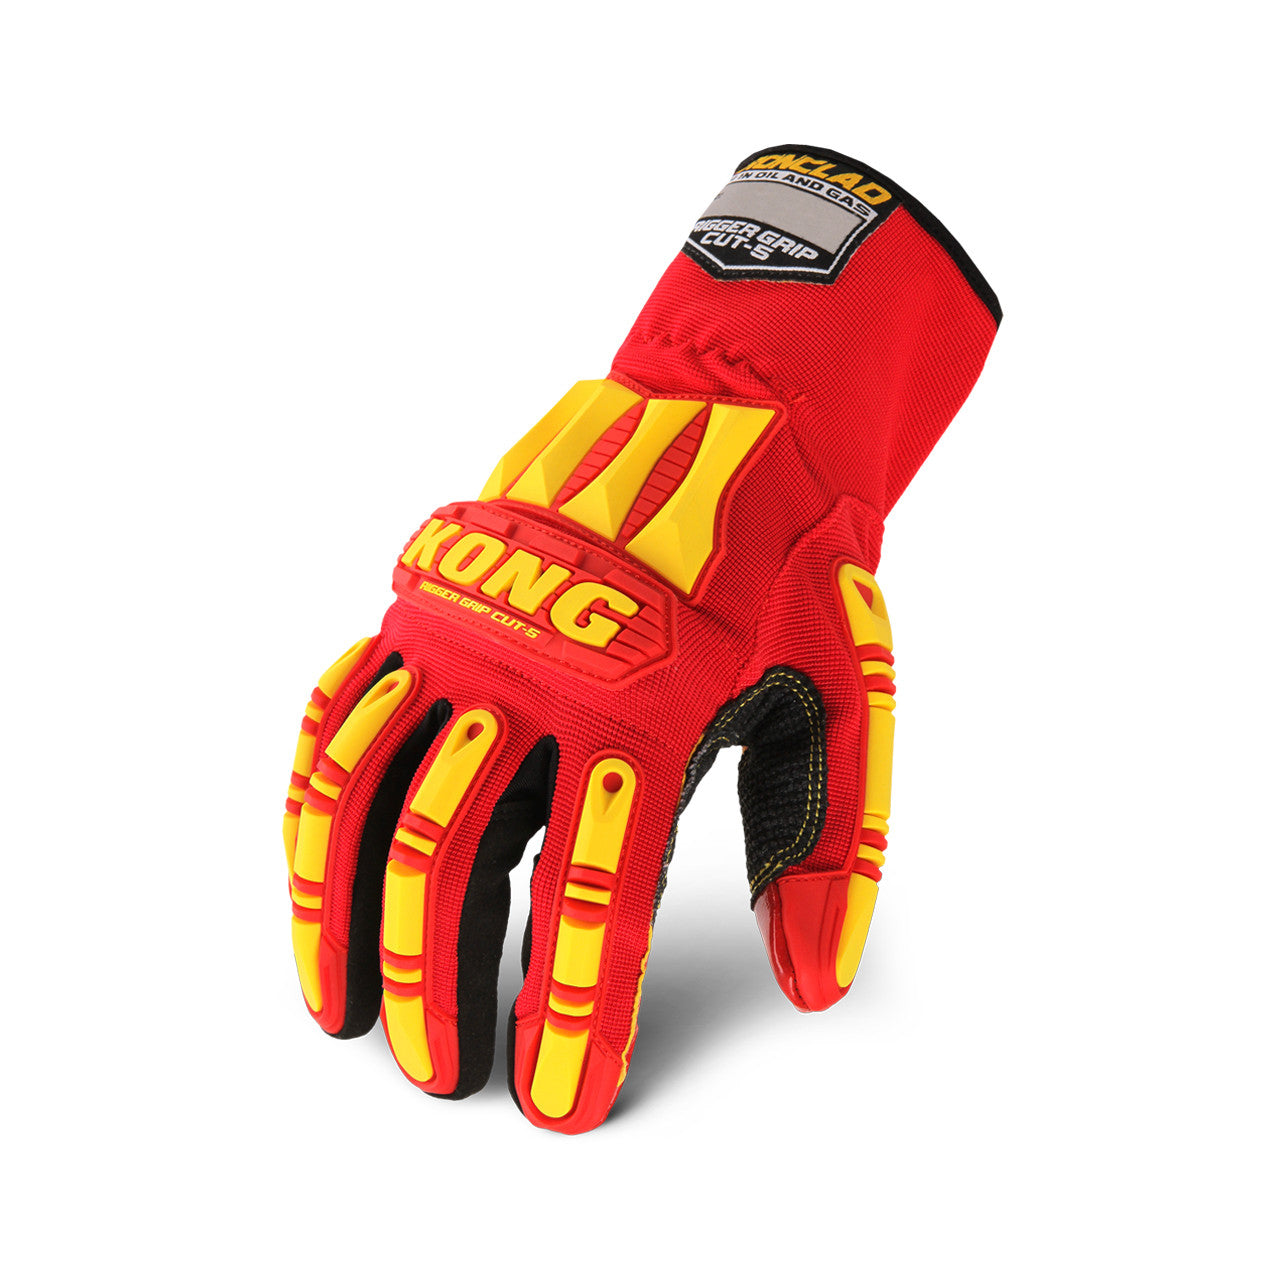 Ironclad KONG® Rigger Cut A5 Red/Yellow Glove-eSafety Supplies, Inc